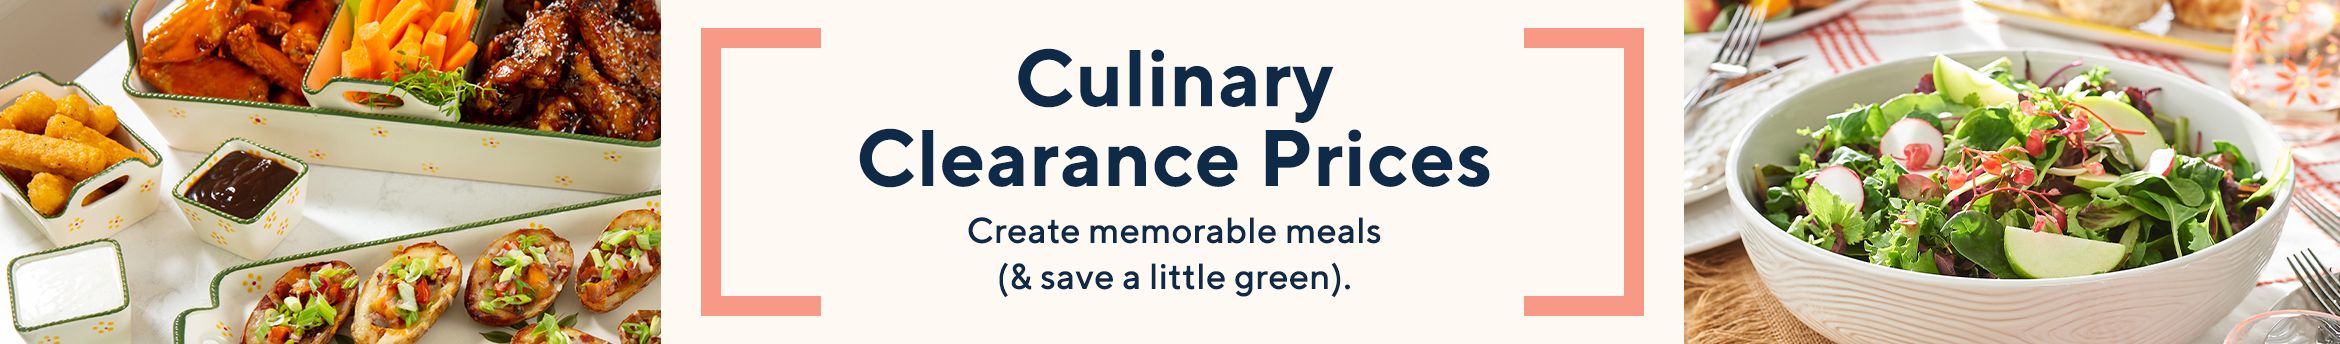 Culinary Clearance Prices  Create memorable meals (& save a little green). 